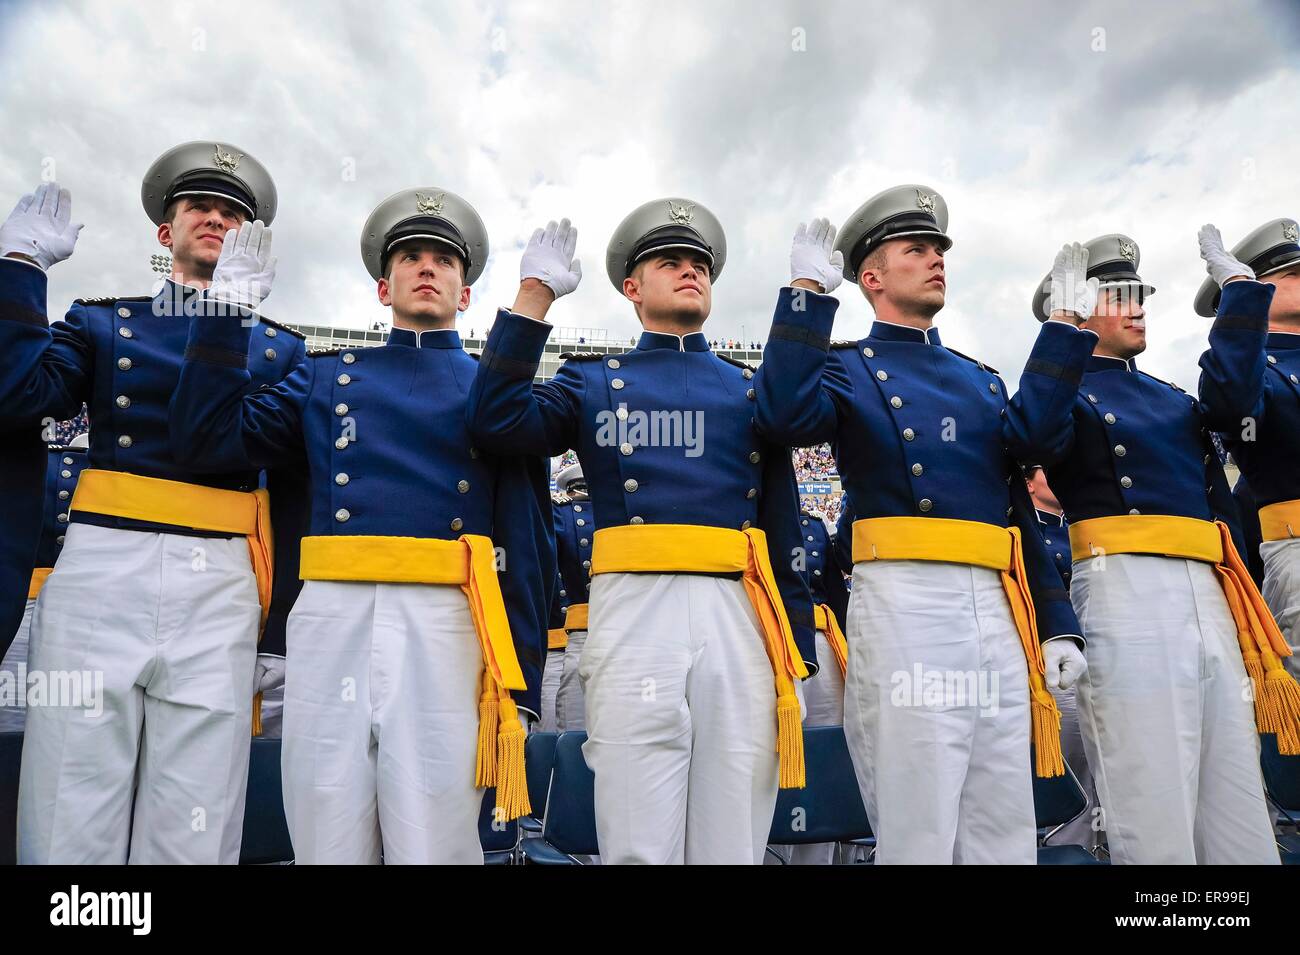 Cadets at the U.S. Air Force Academy Class of 2015 take the Oath of Office during commencement May 28, 2015 in Colorado Springs, Colorado. Stock Photo